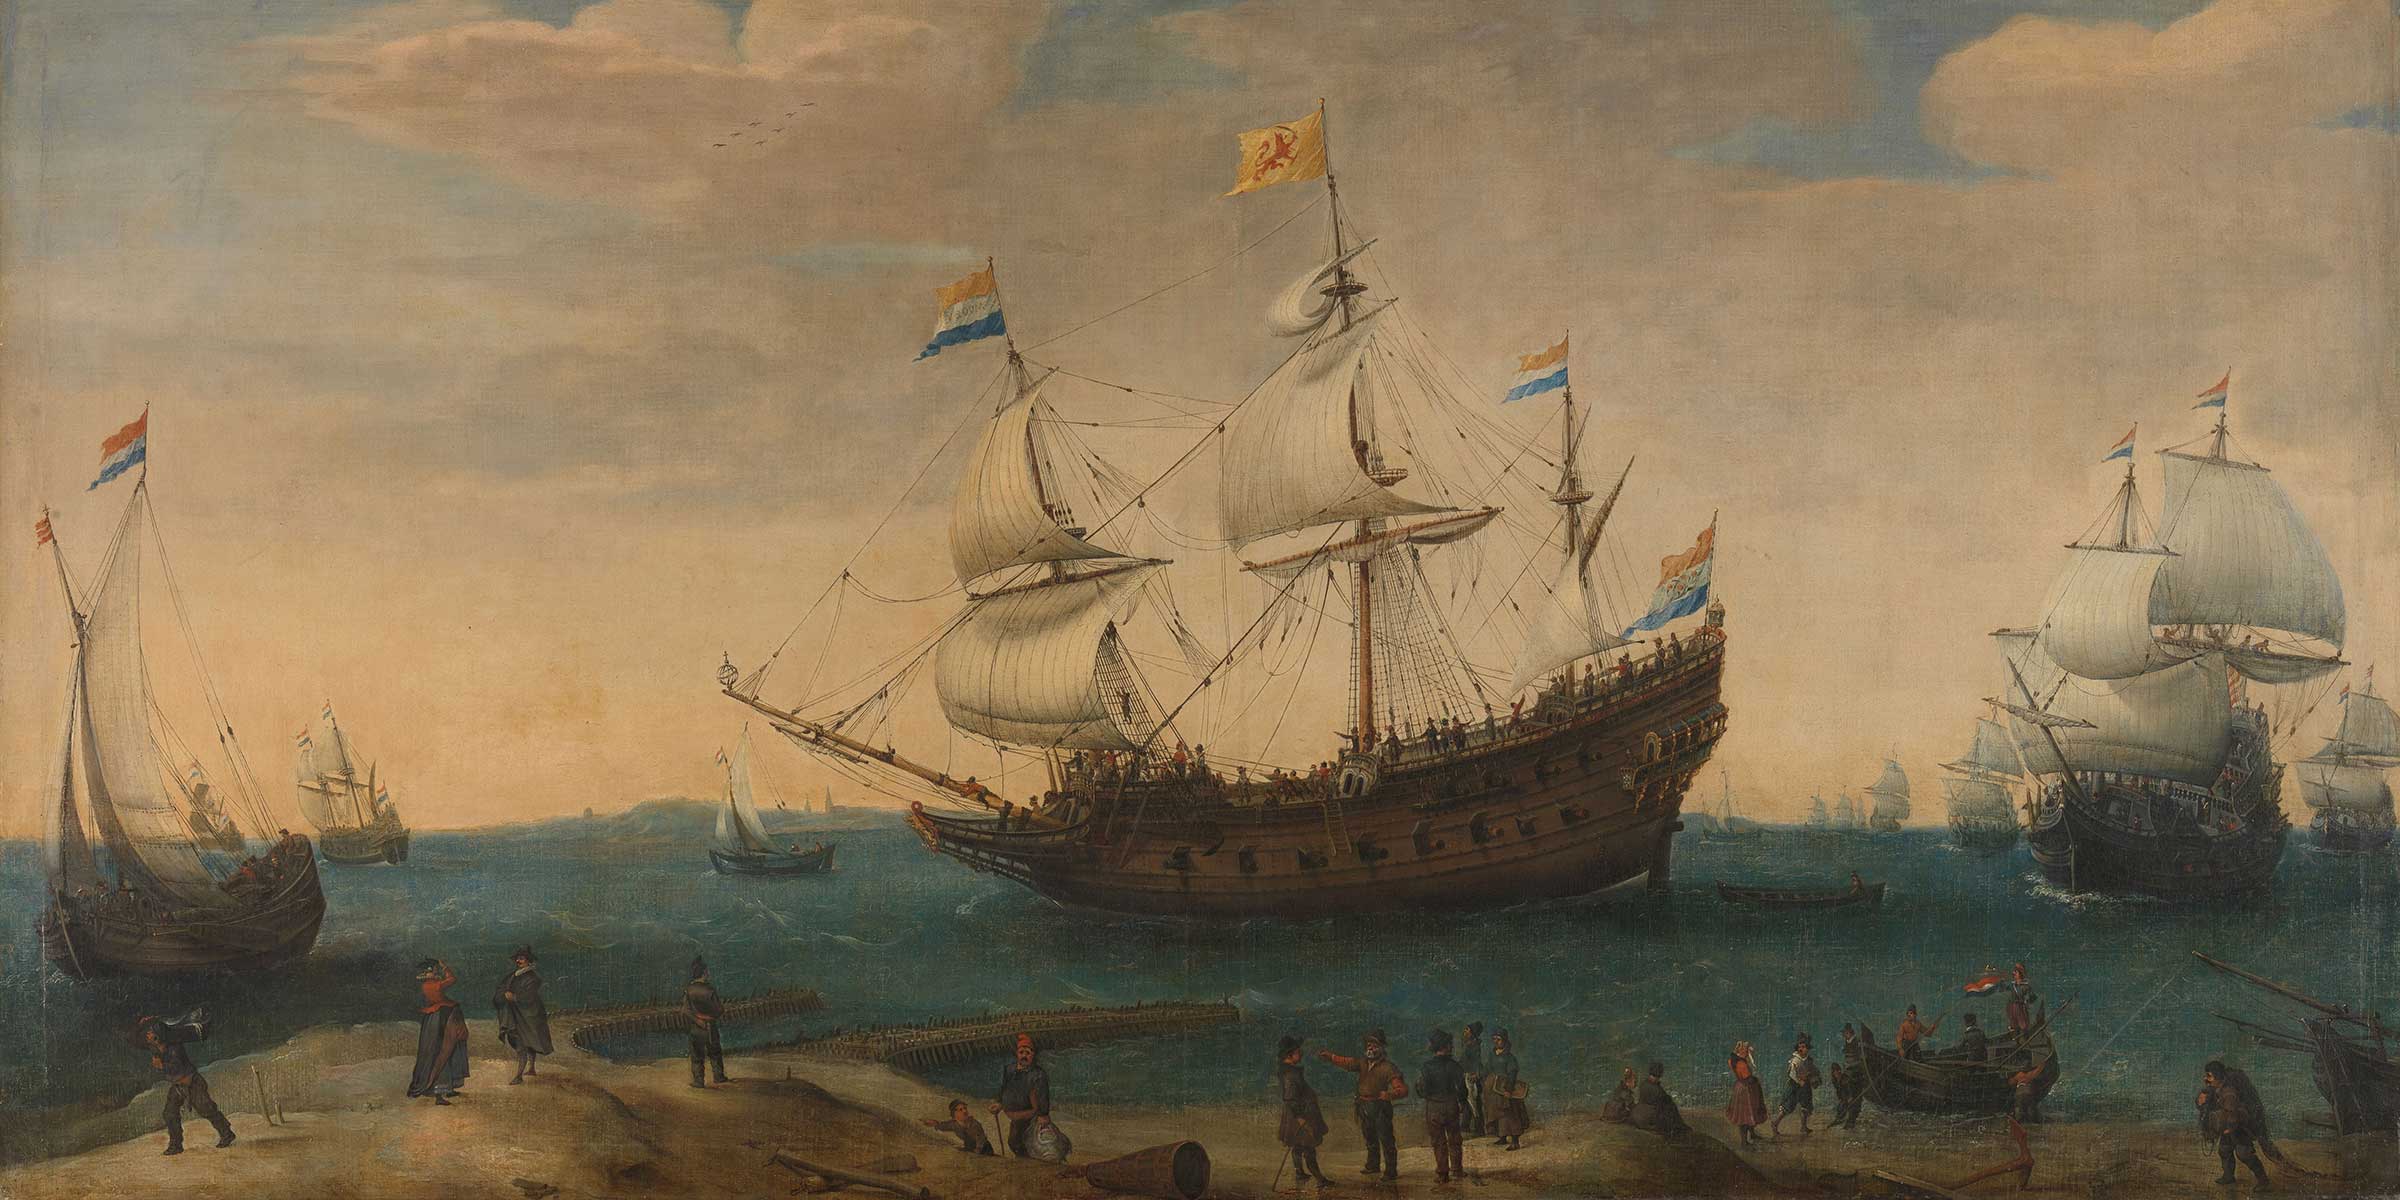 Painting of a ship just off the coast with men on land.